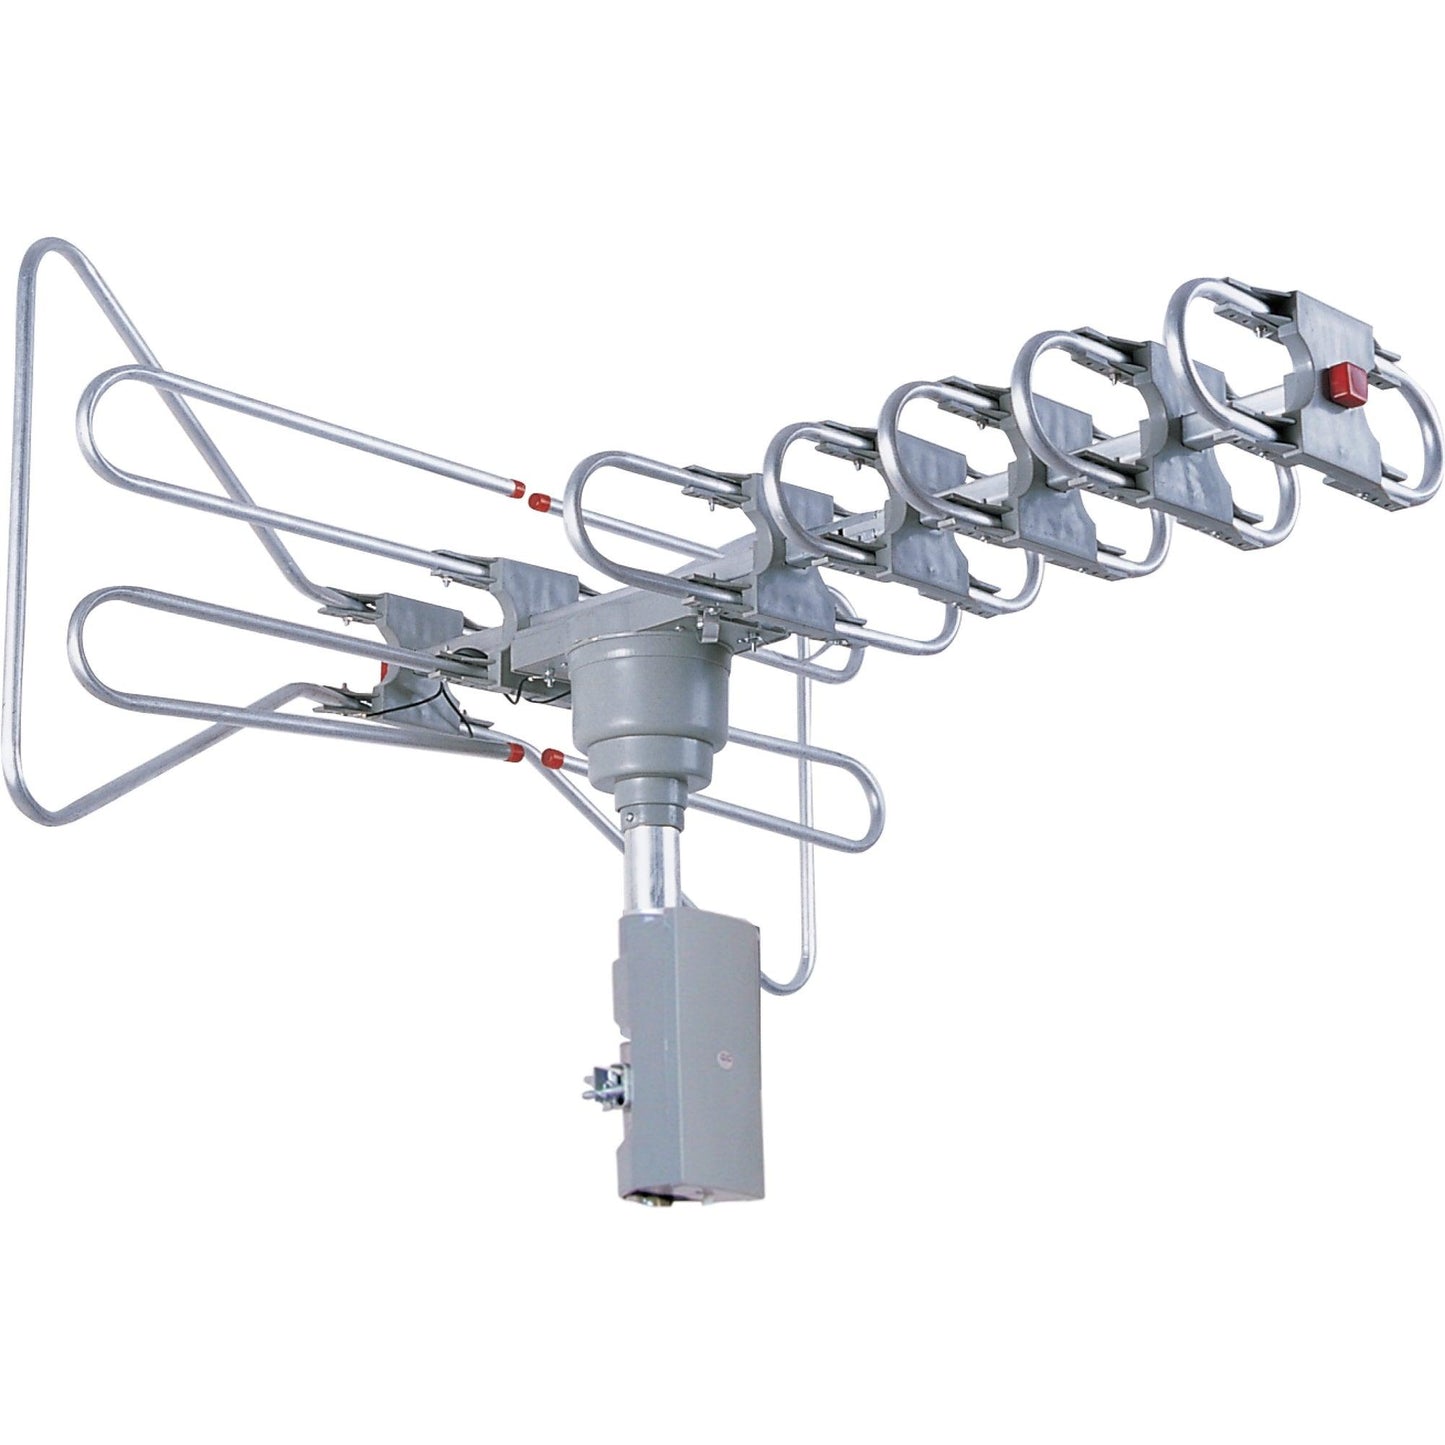 Supersonic 360-Degree HDTV Digital Amplified Motorized Antenna with Remote Control, Supports 2 TV Sets (SC-603) by VYSN